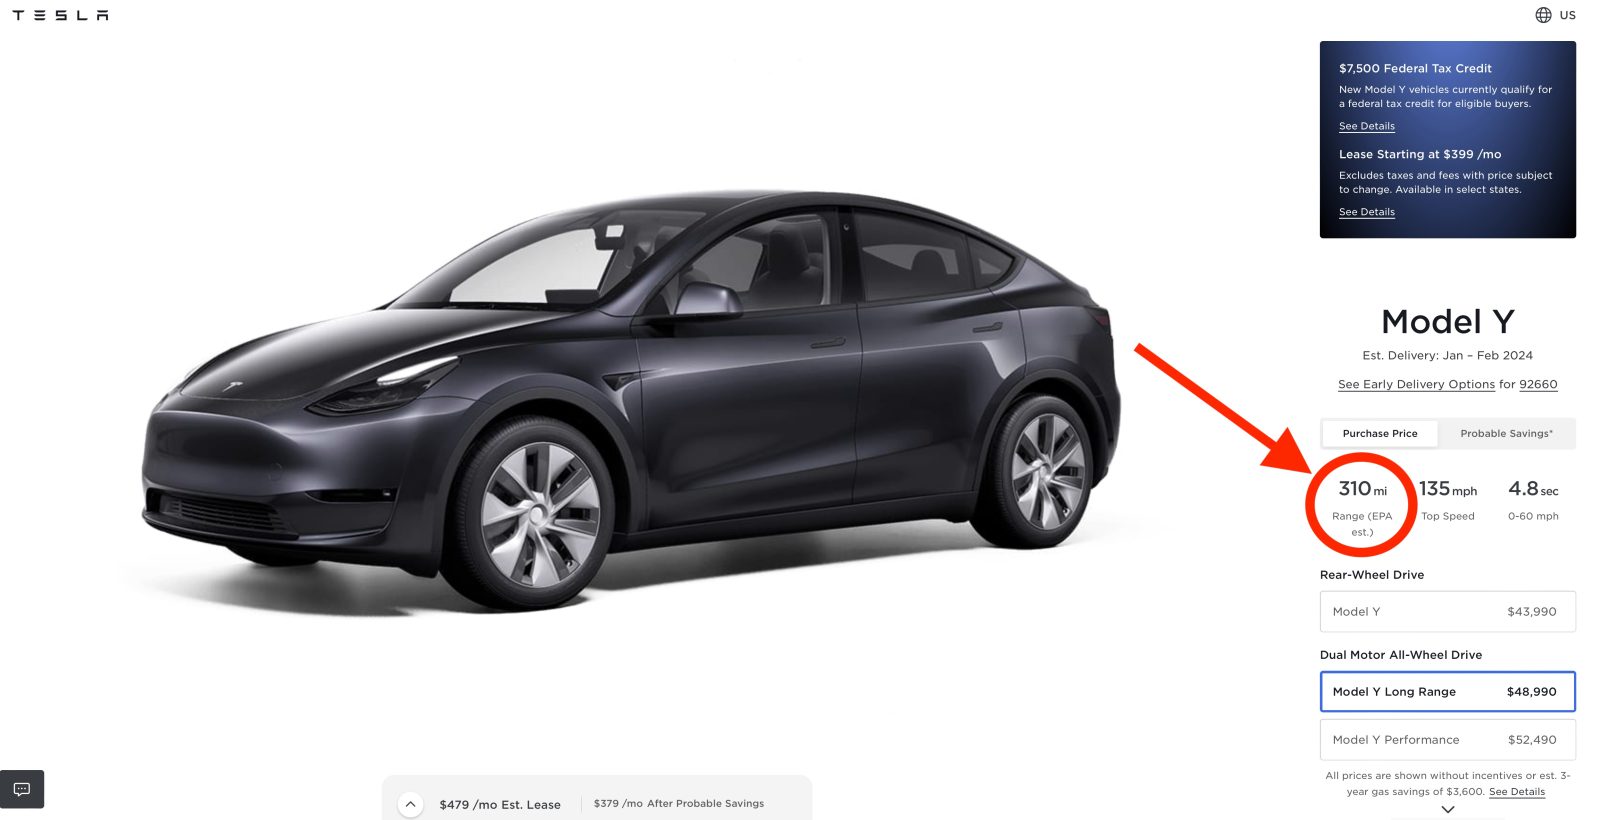 Tesla Model 3 RWD and Long Range tax credits reduced for 2024